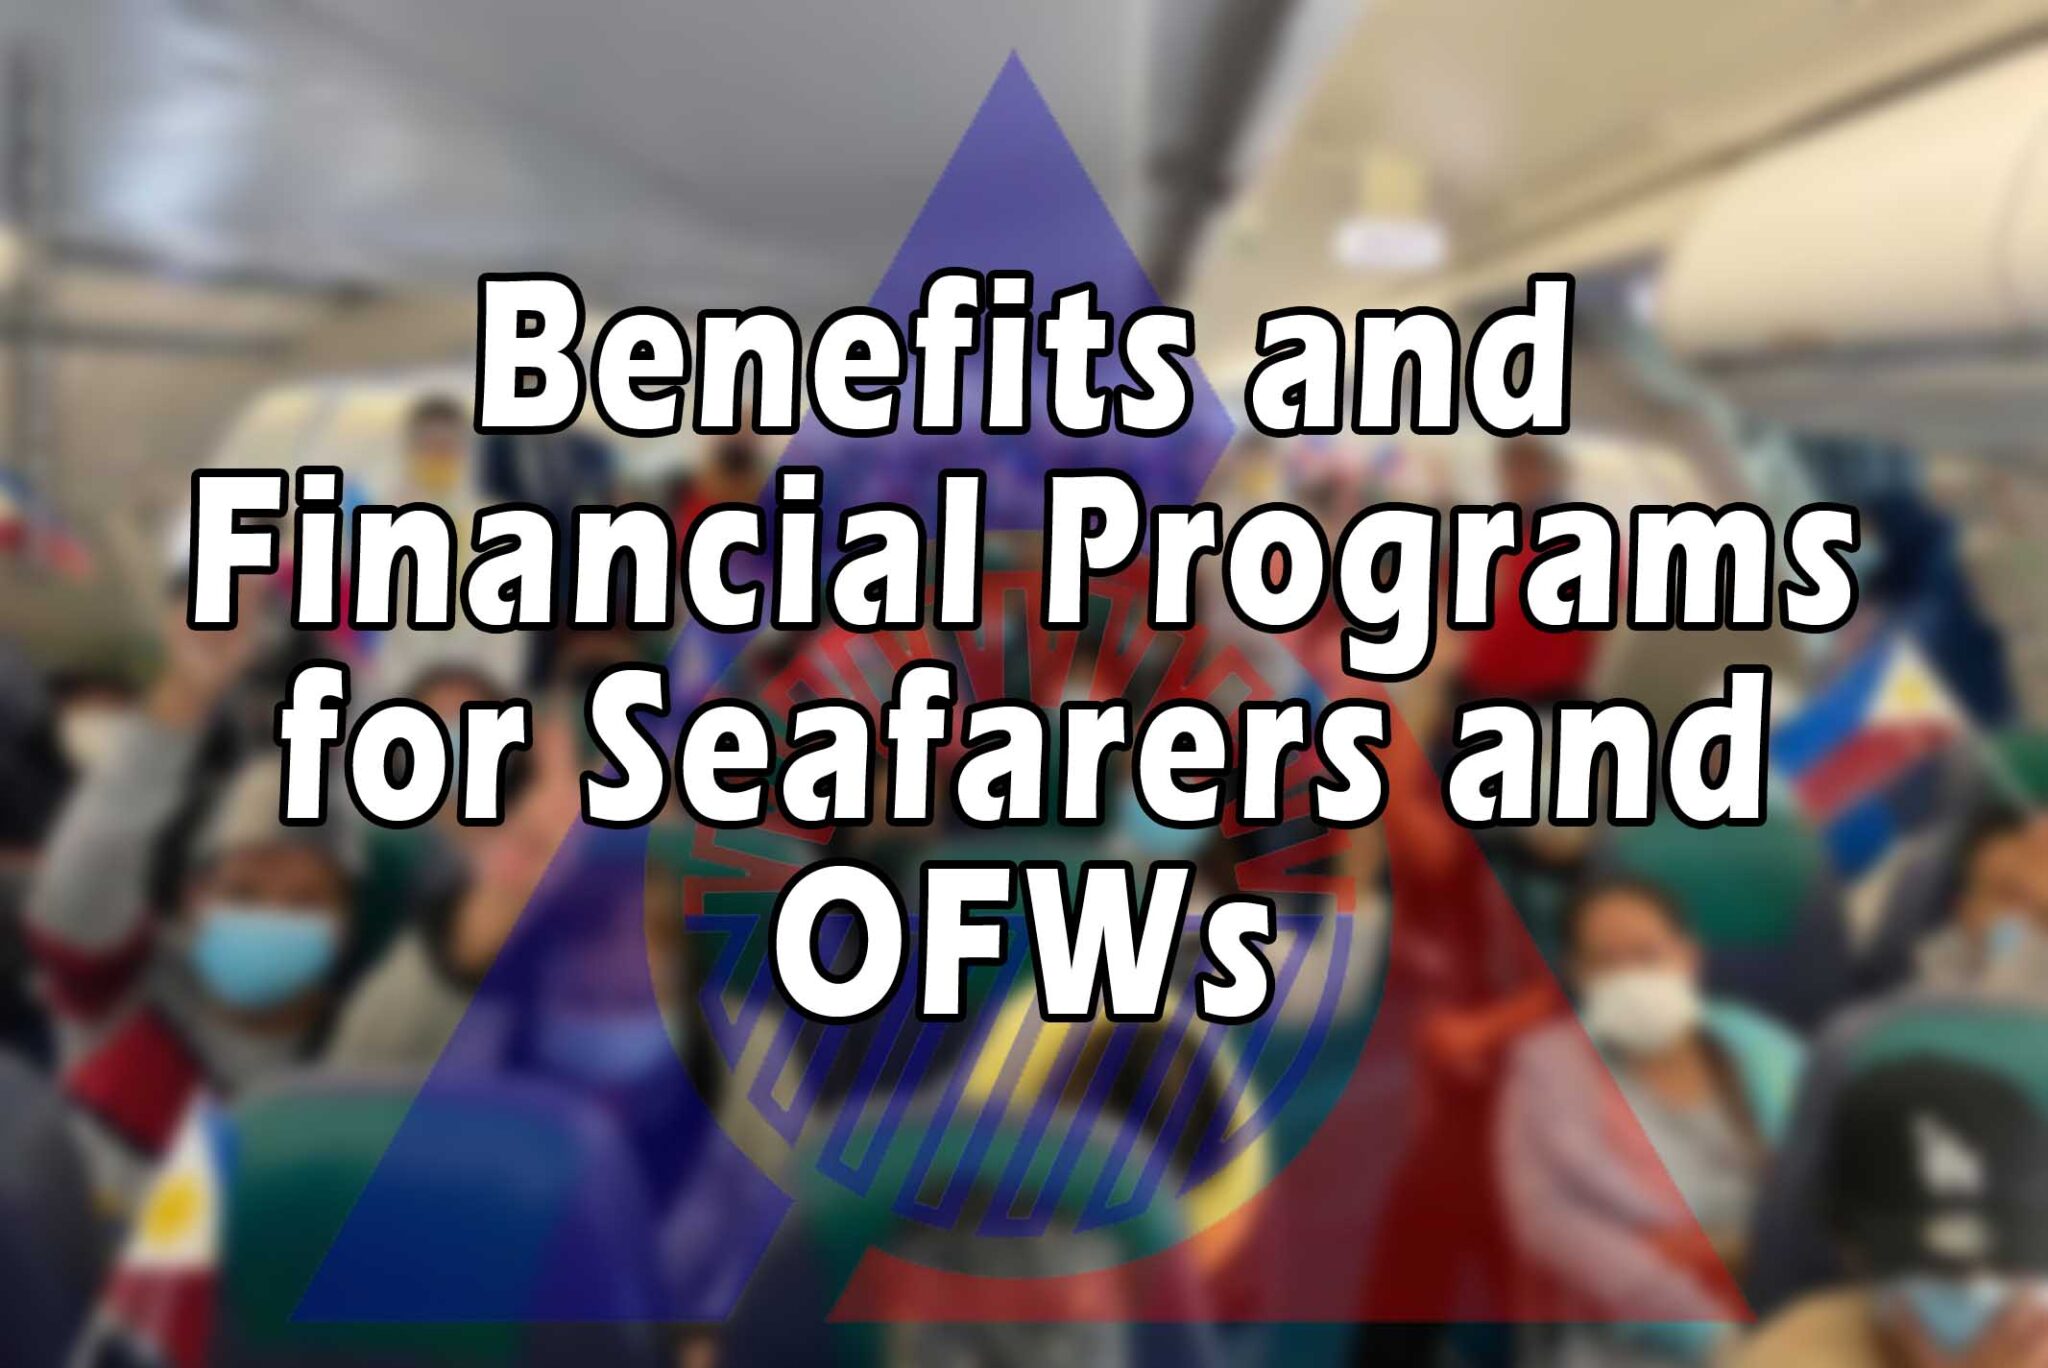 Featured image for the article., "Benefits and Financial Programs for Seafarers and OFWs"